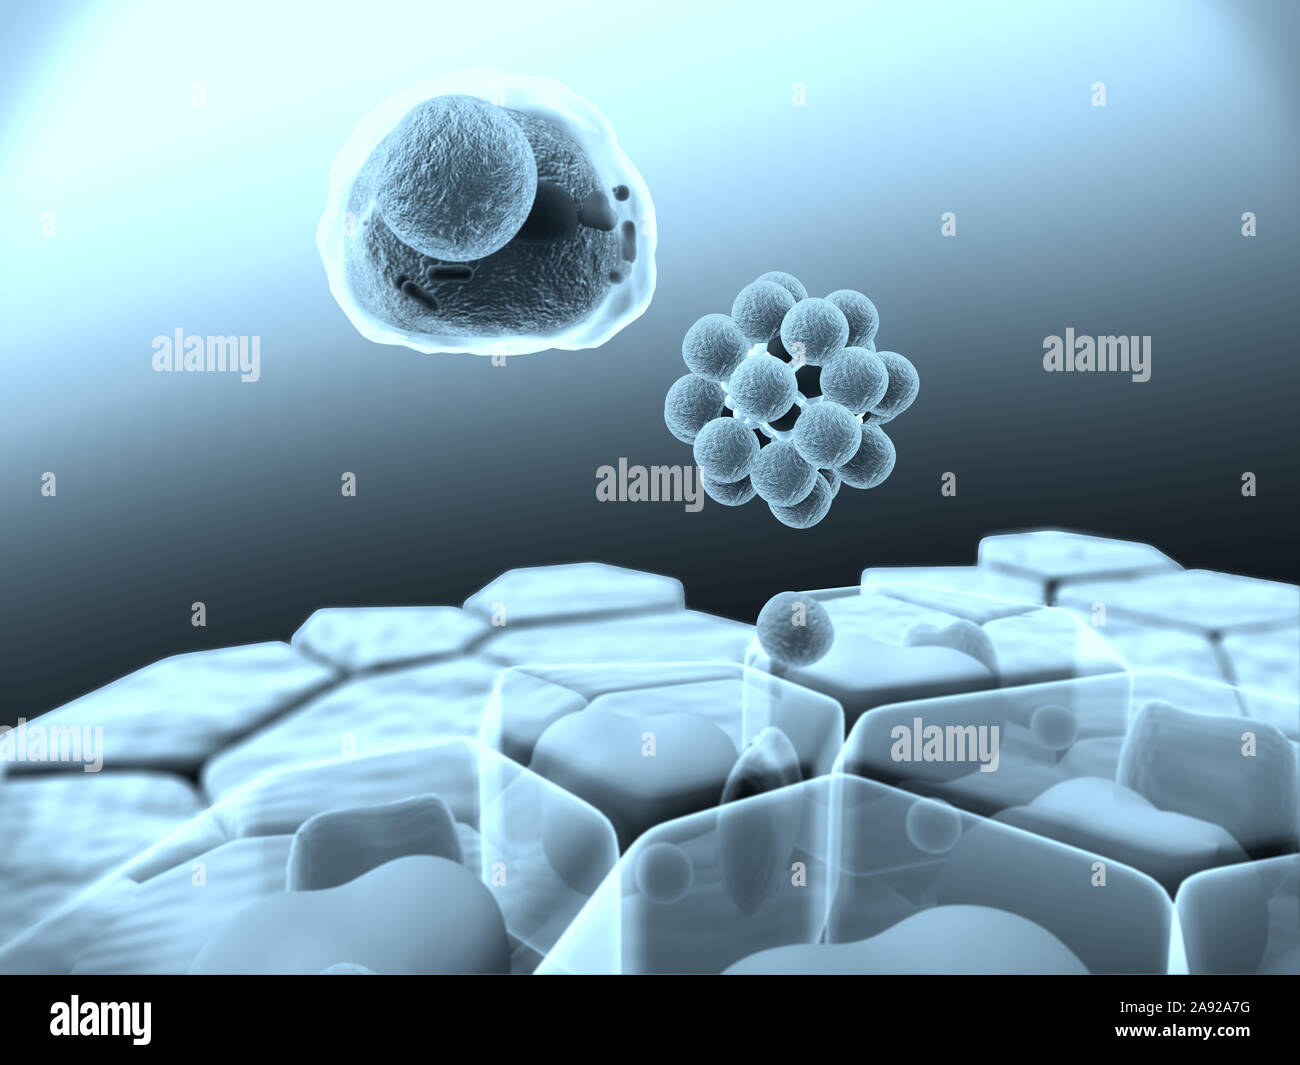 fat cells, subcutaneous fat, illustration of human leather anatomy Stock Photo